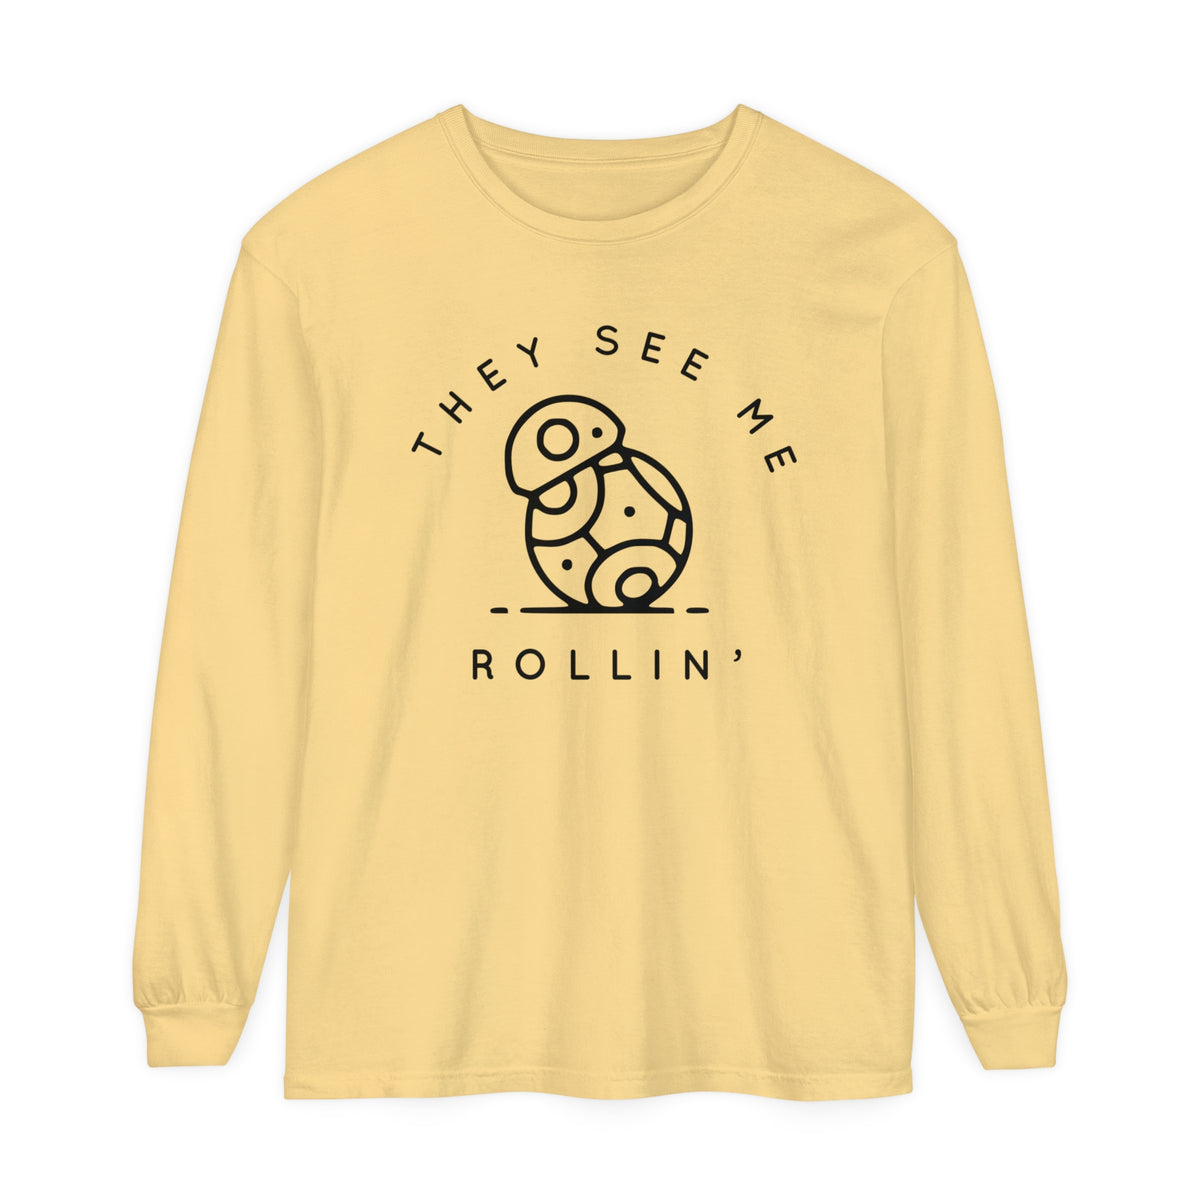 They See Me Rollin' Comfort Colors Unisex Garment-dyed Long Sleeve T-Shirt